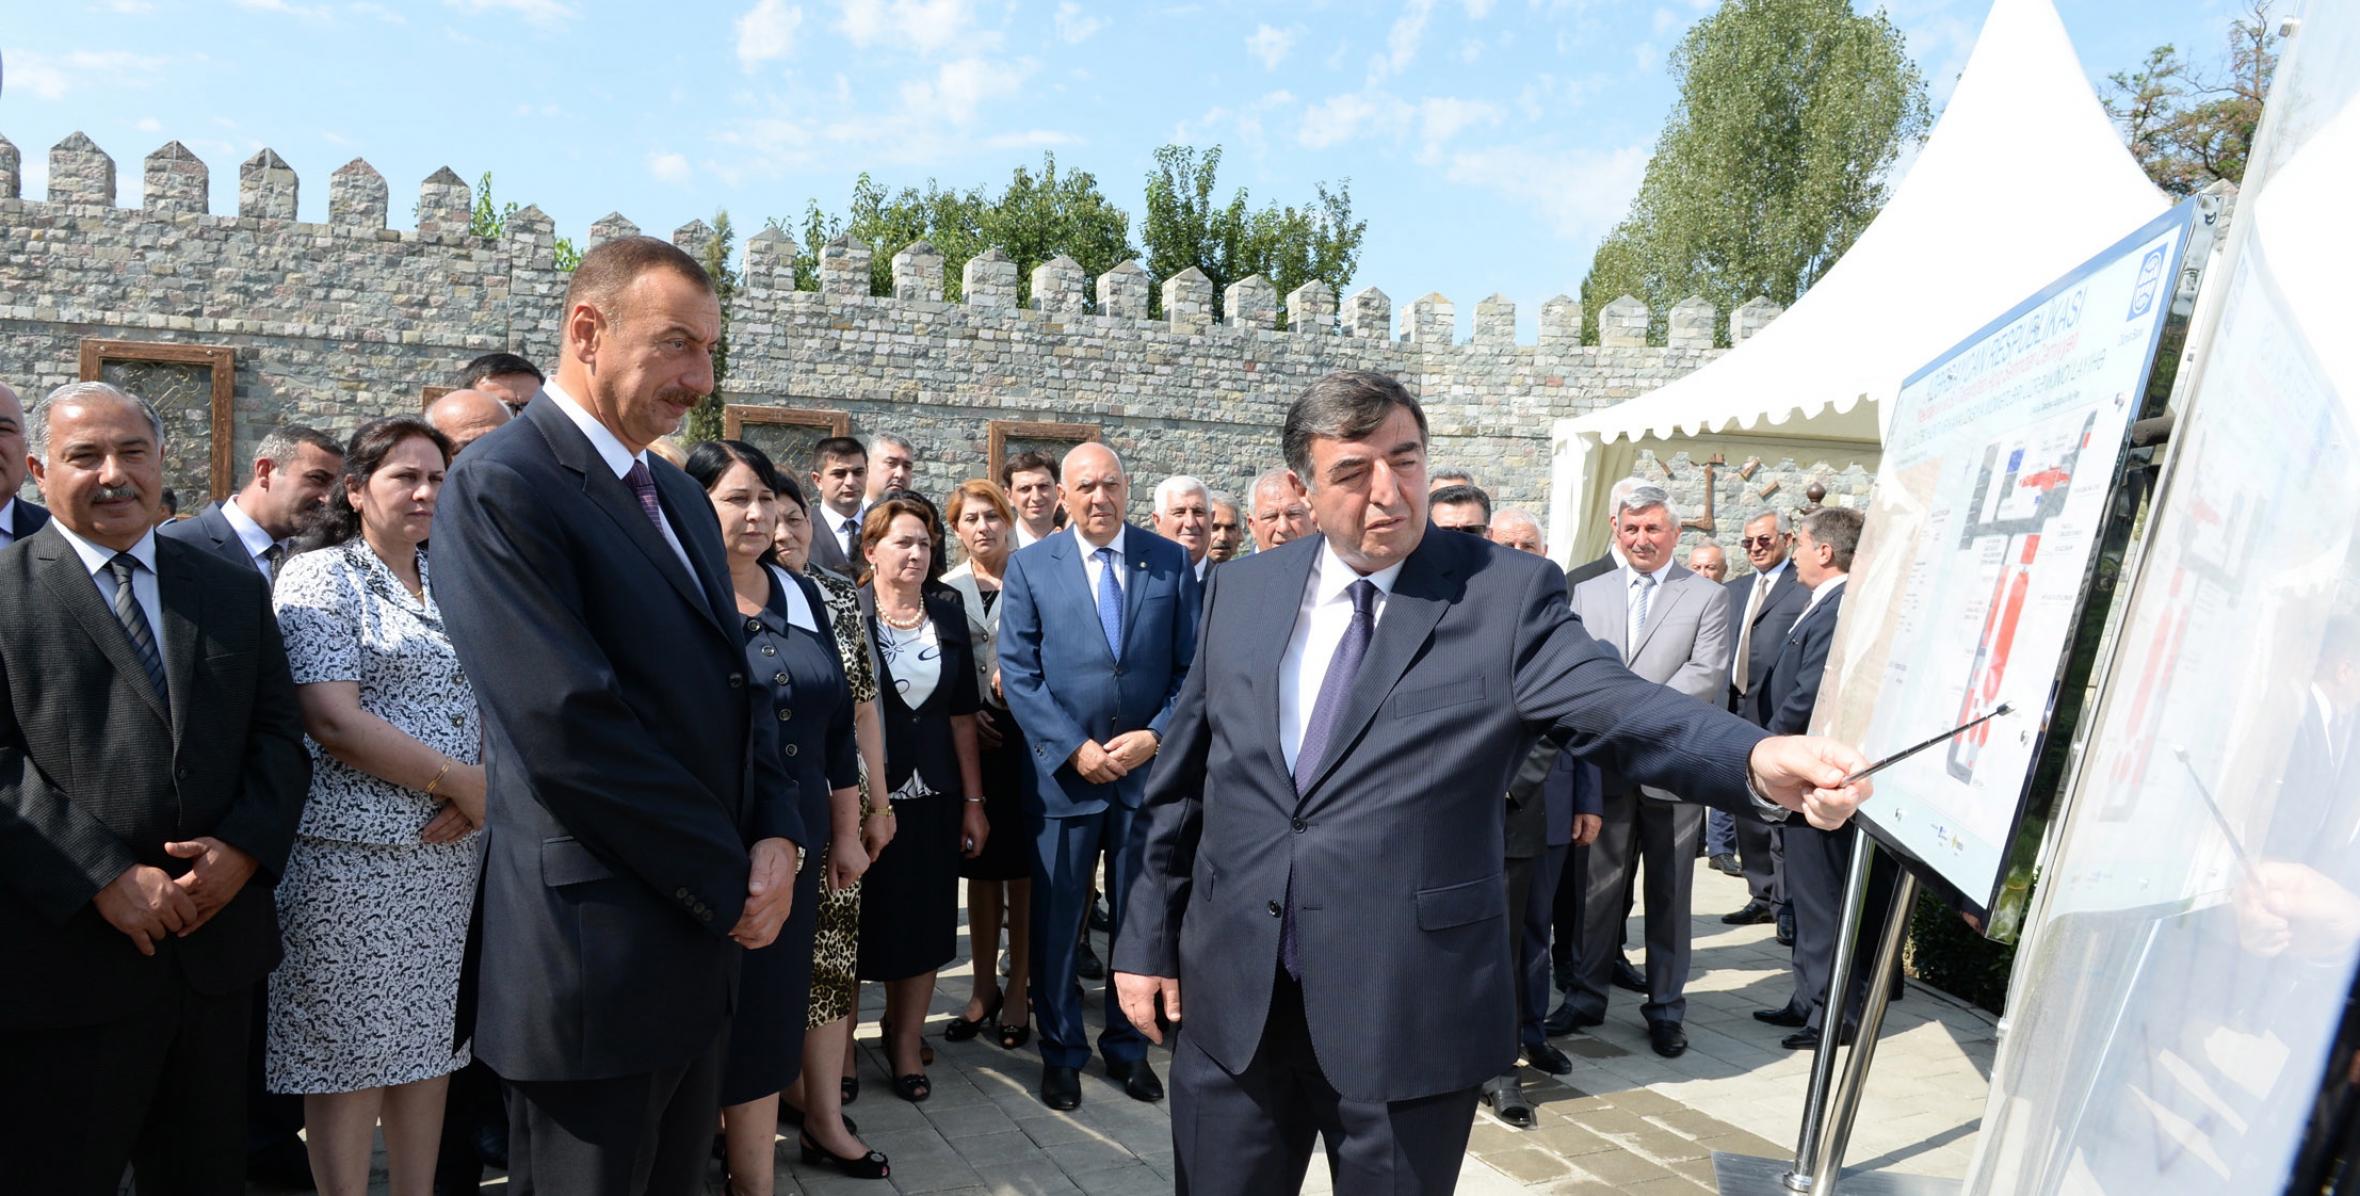 Ilham Aliyev attended a ceremony to mark the supply of drinking water to Ismayilli city